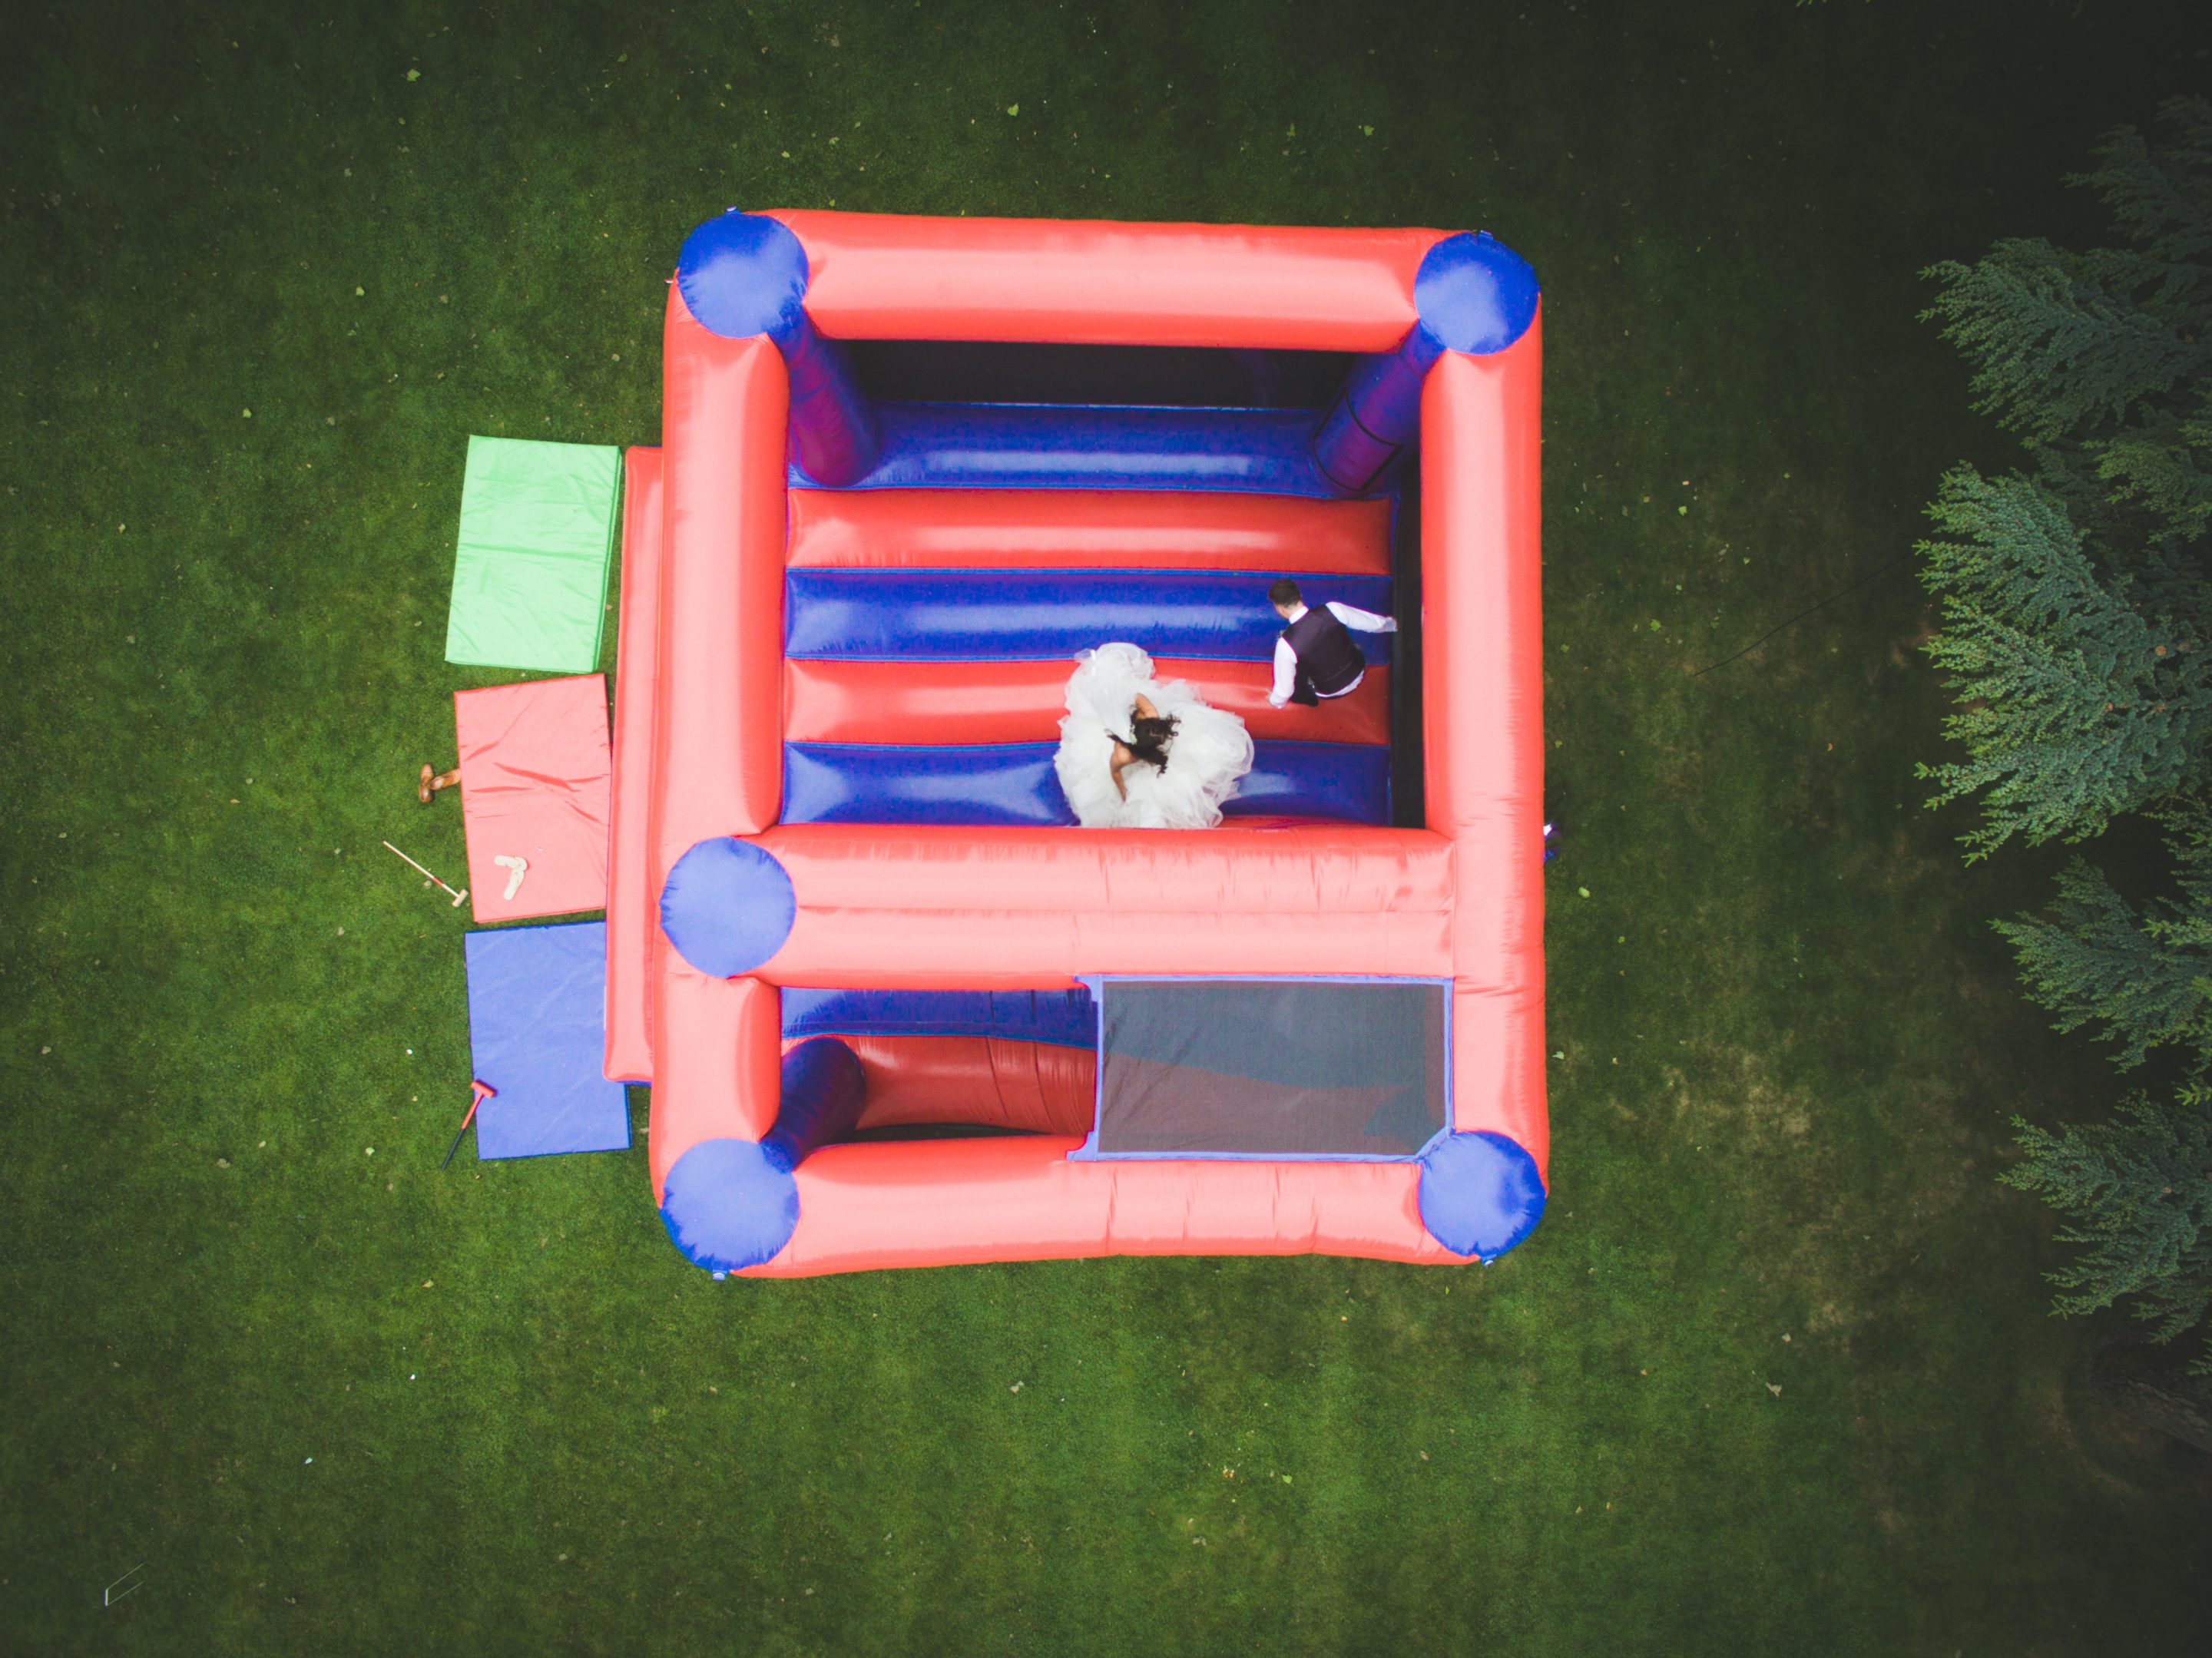 Bouncy castle shot from above with the drone, DJI Phantom, wedding photography